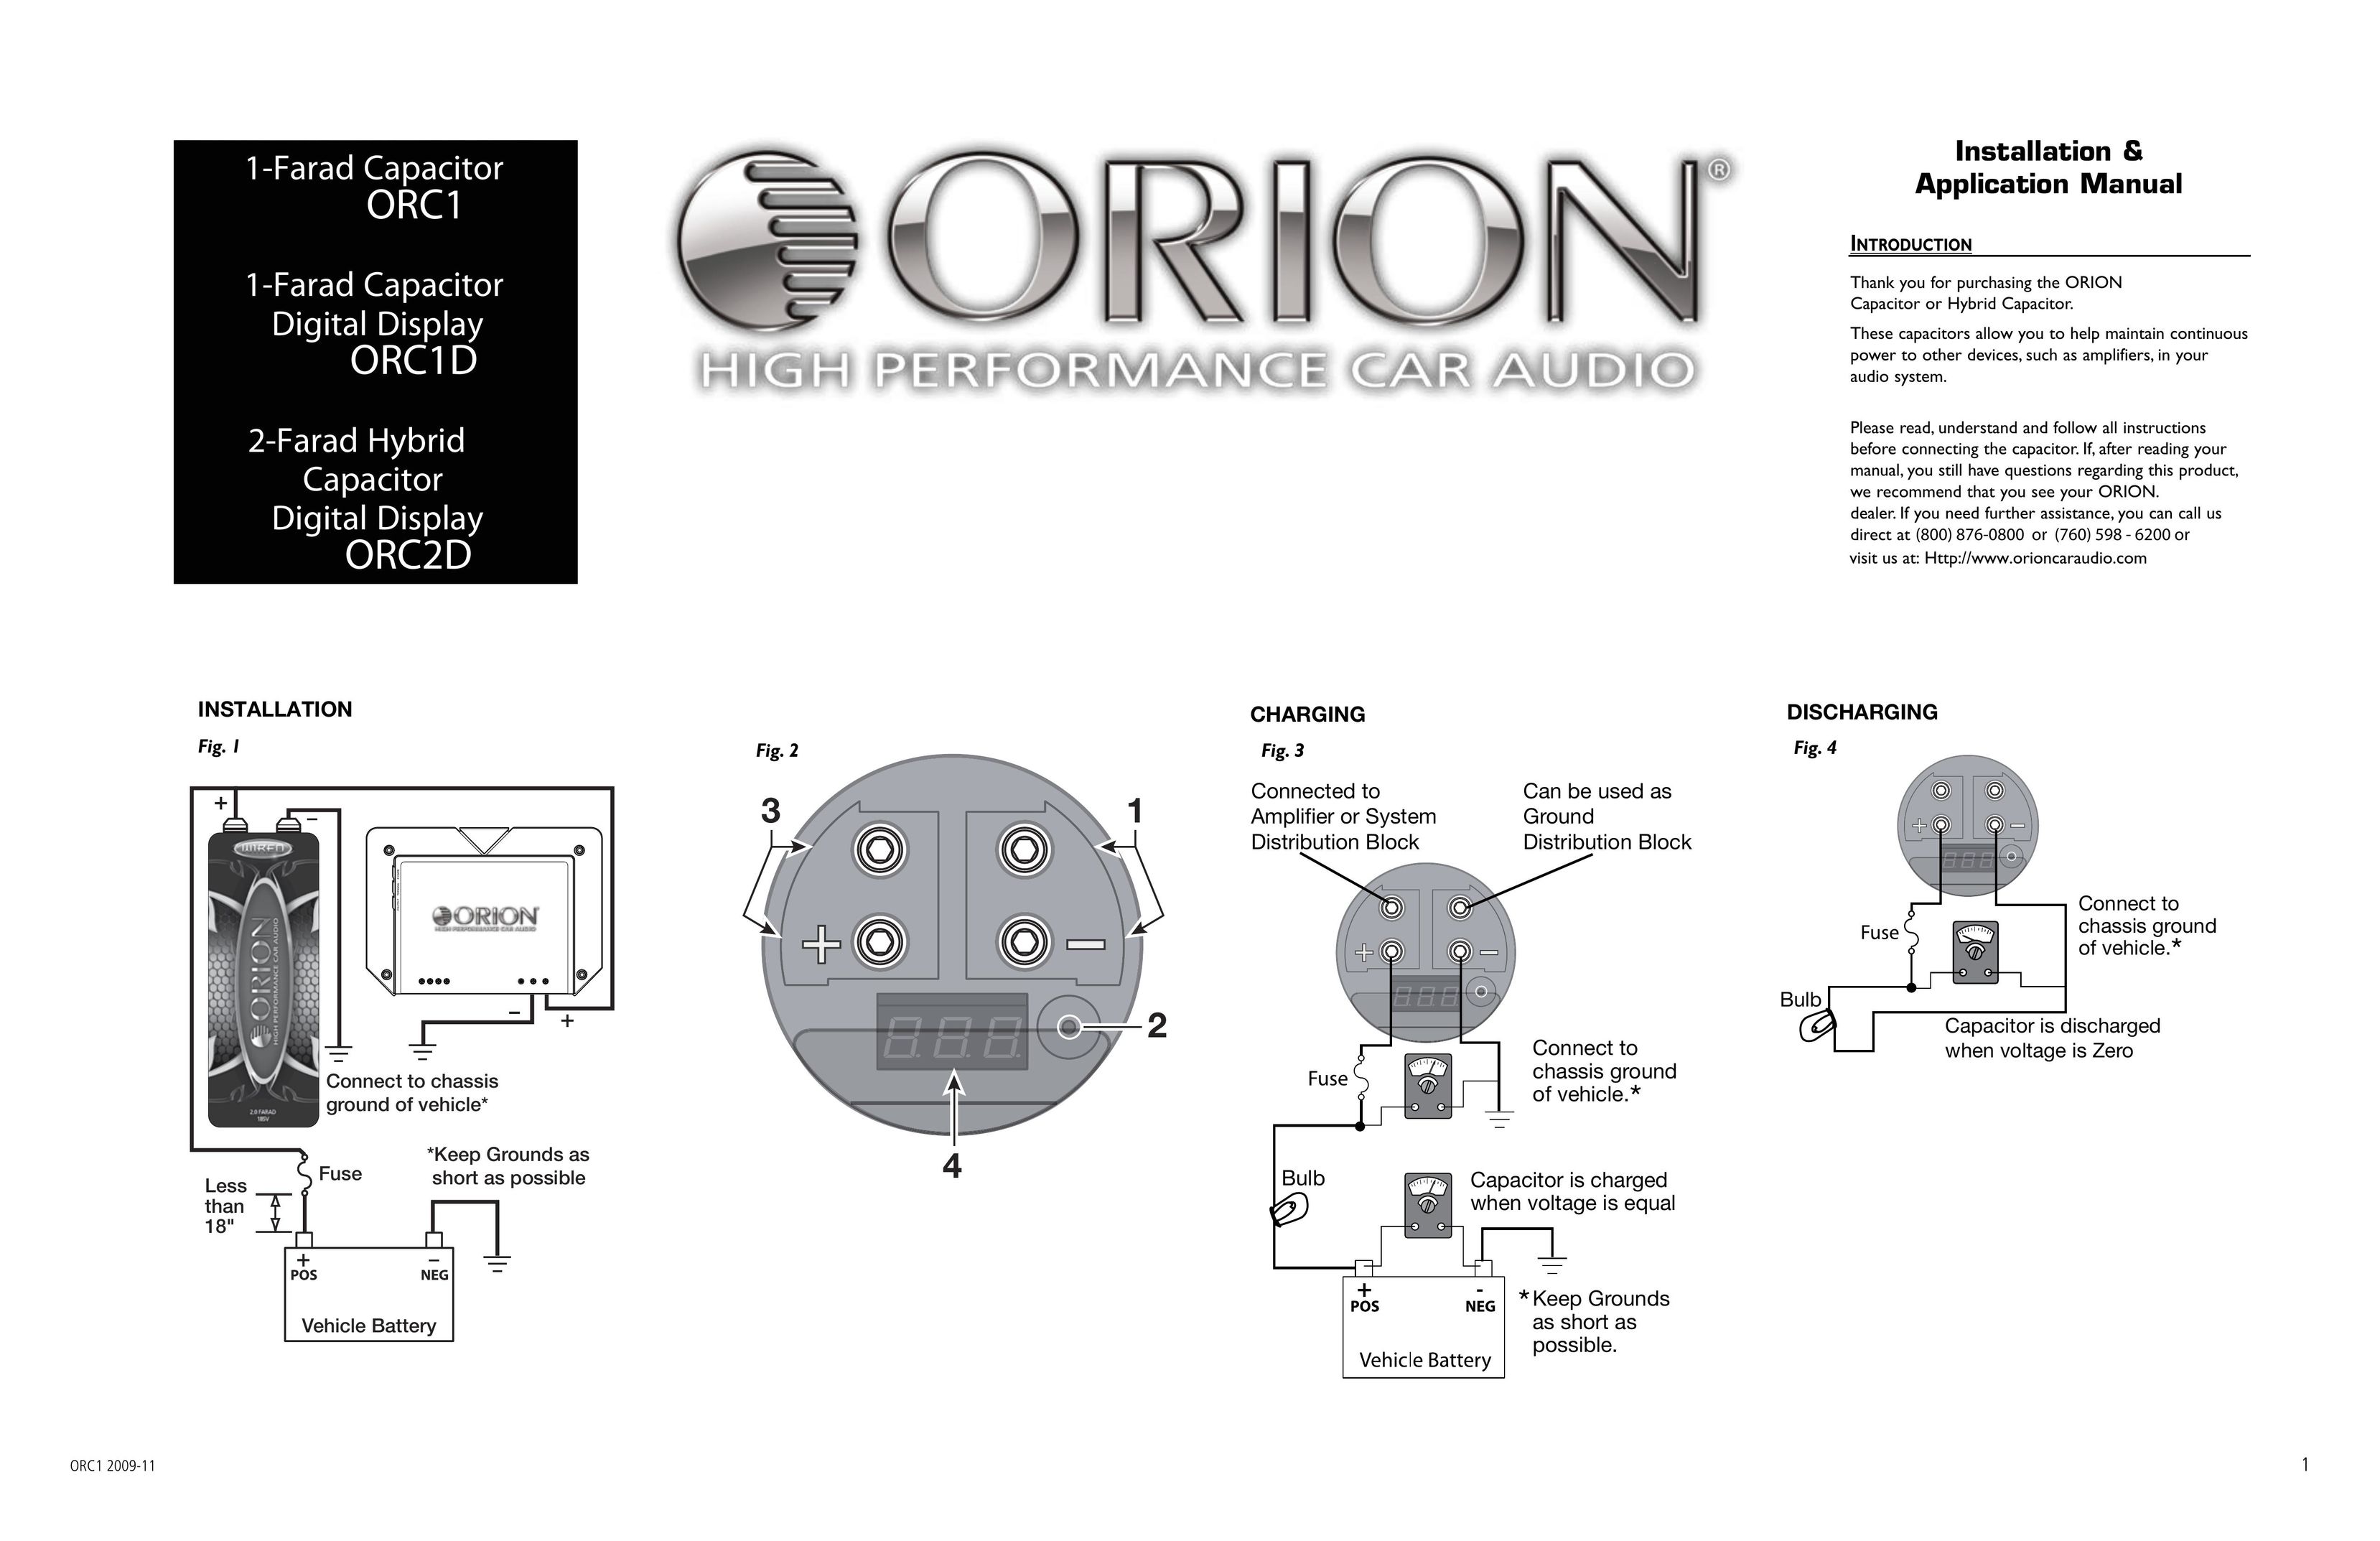 Orion Car Audio ORC1D Car Stereo System User Manual